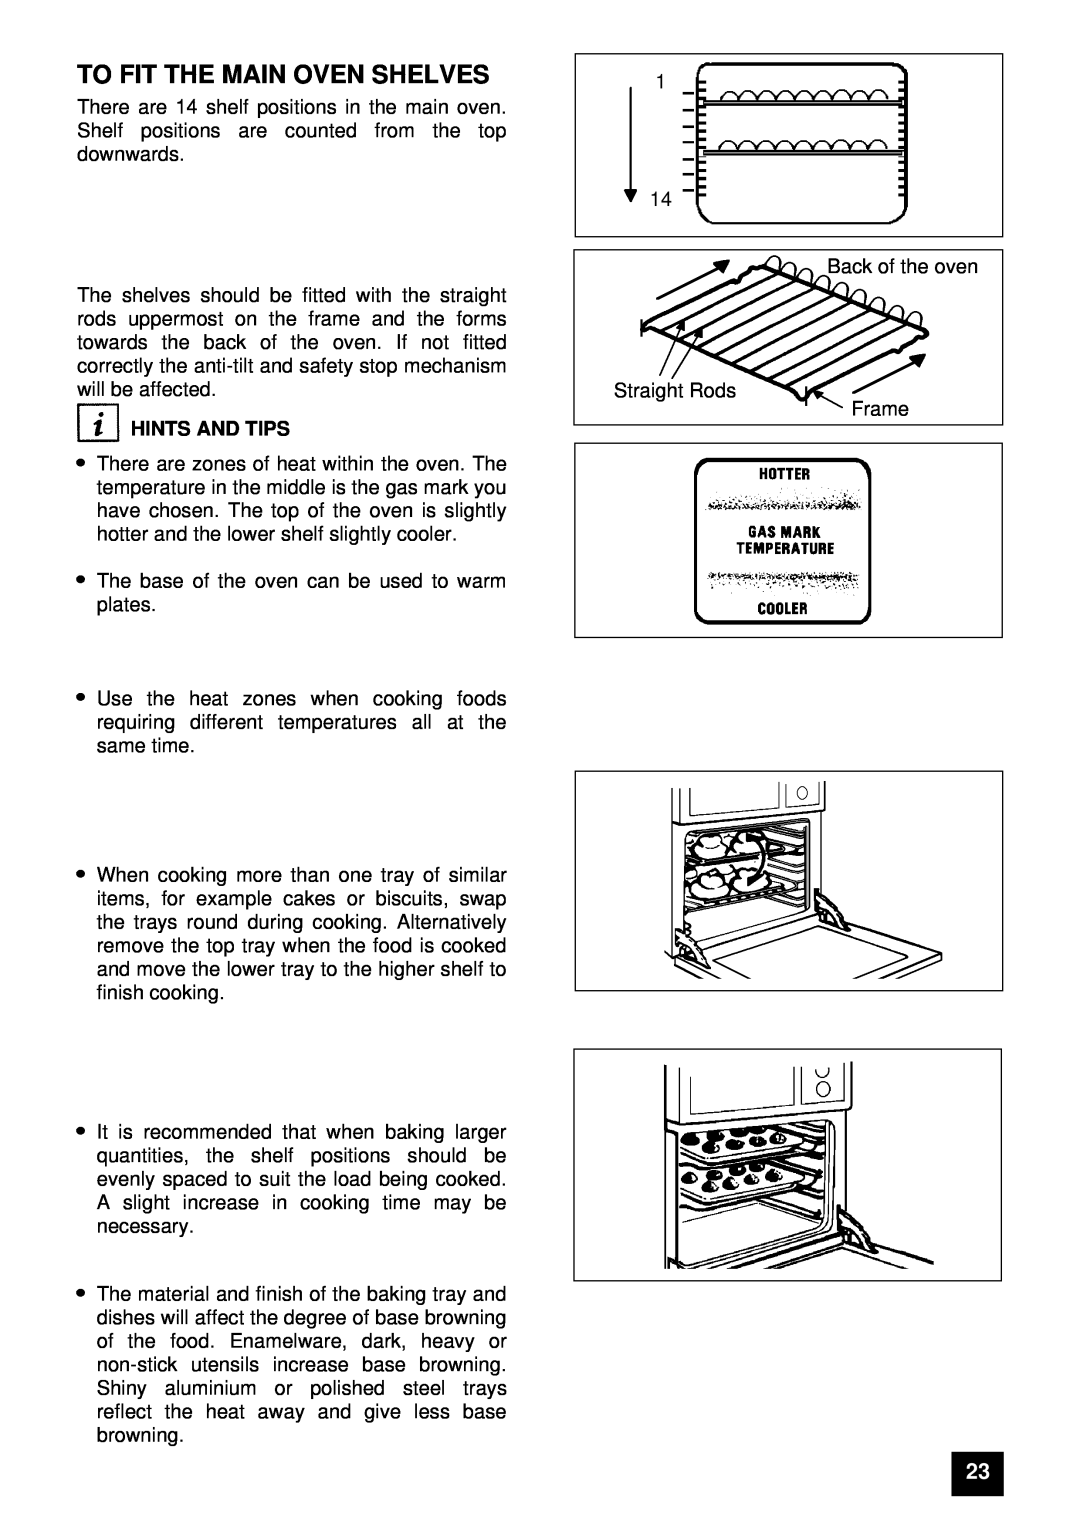 Zanussi ZUG 78 manual To Fit The Main Oven Shelves, Hints And Tips 